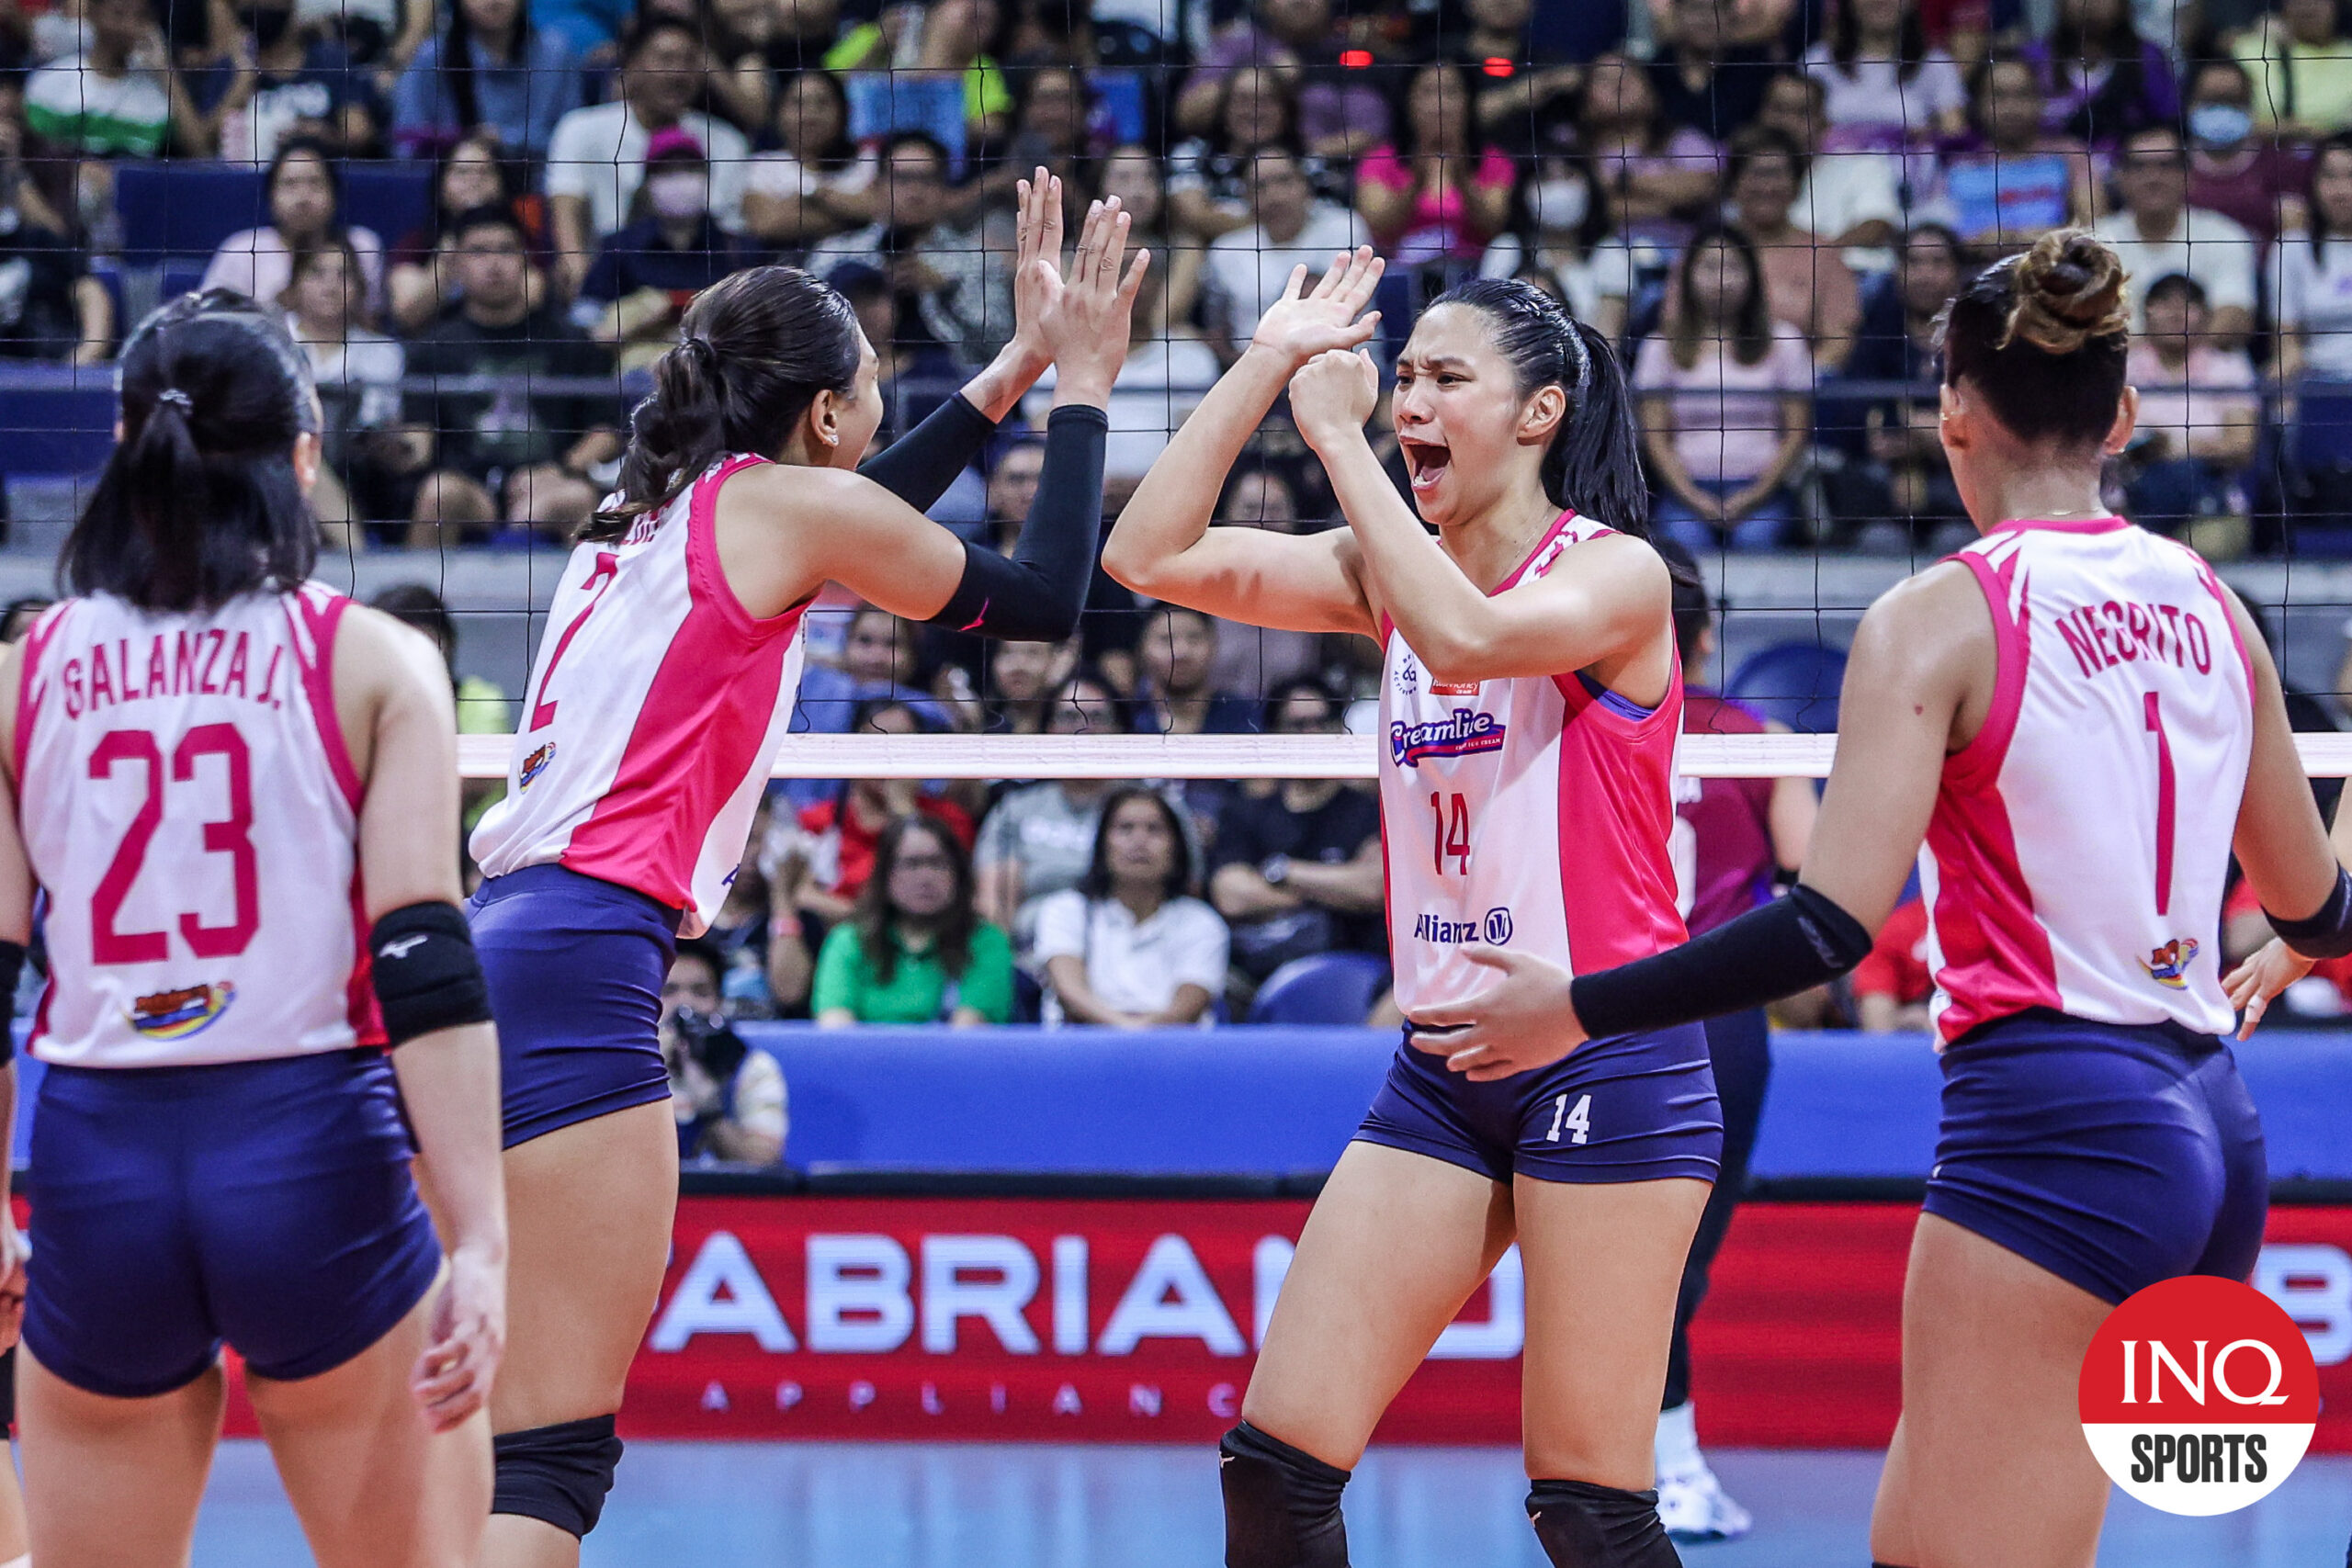 Creamlline Cool Smashers' Bea De Leon (right) and Alyssa Valdez share a high five after a point.